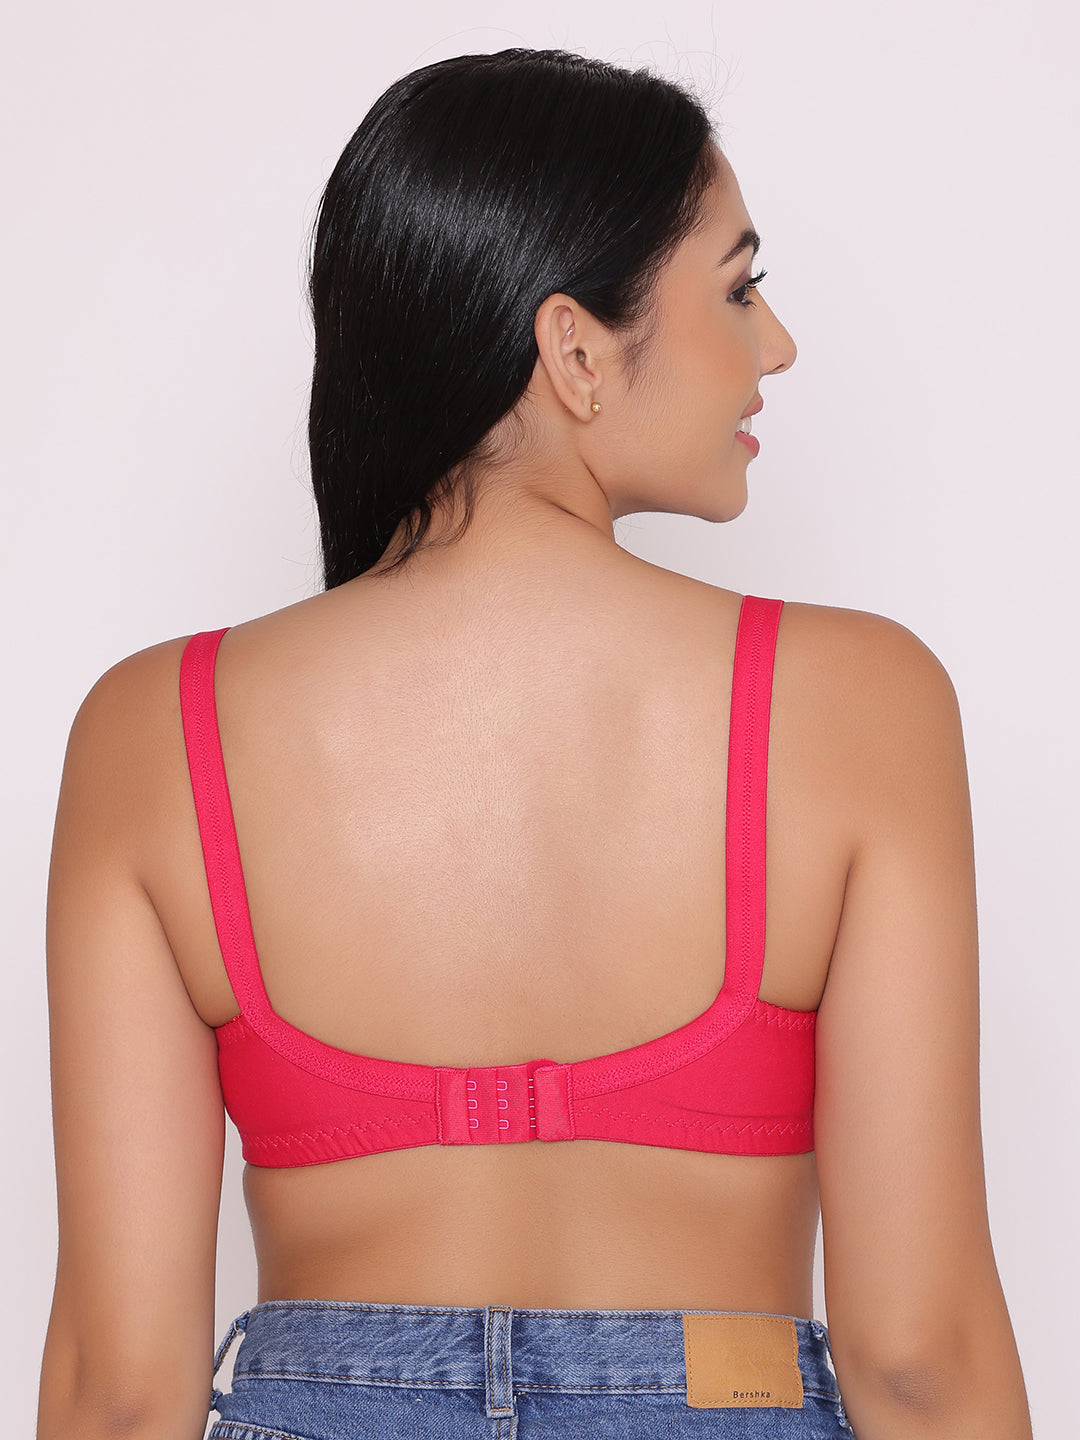 Nysa Non-Padded Full Coverage T-Shirt Bra (Pack of 1) – Incare